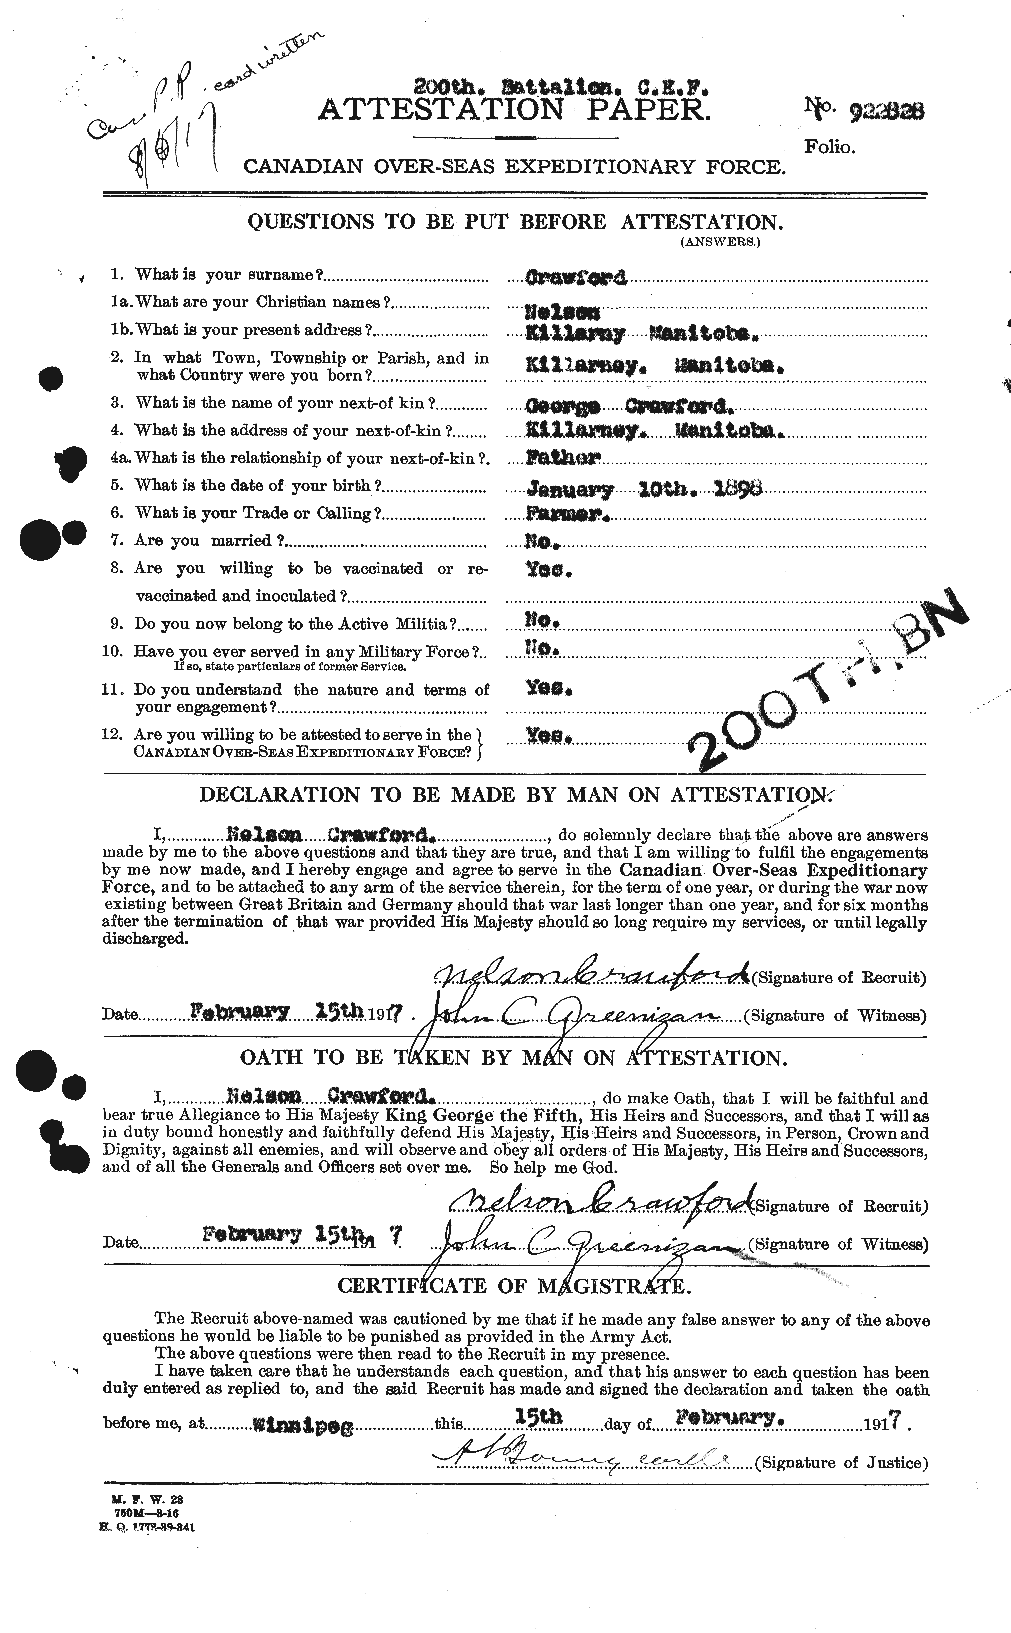 Personnel Records of the First World War - CEF 061664a